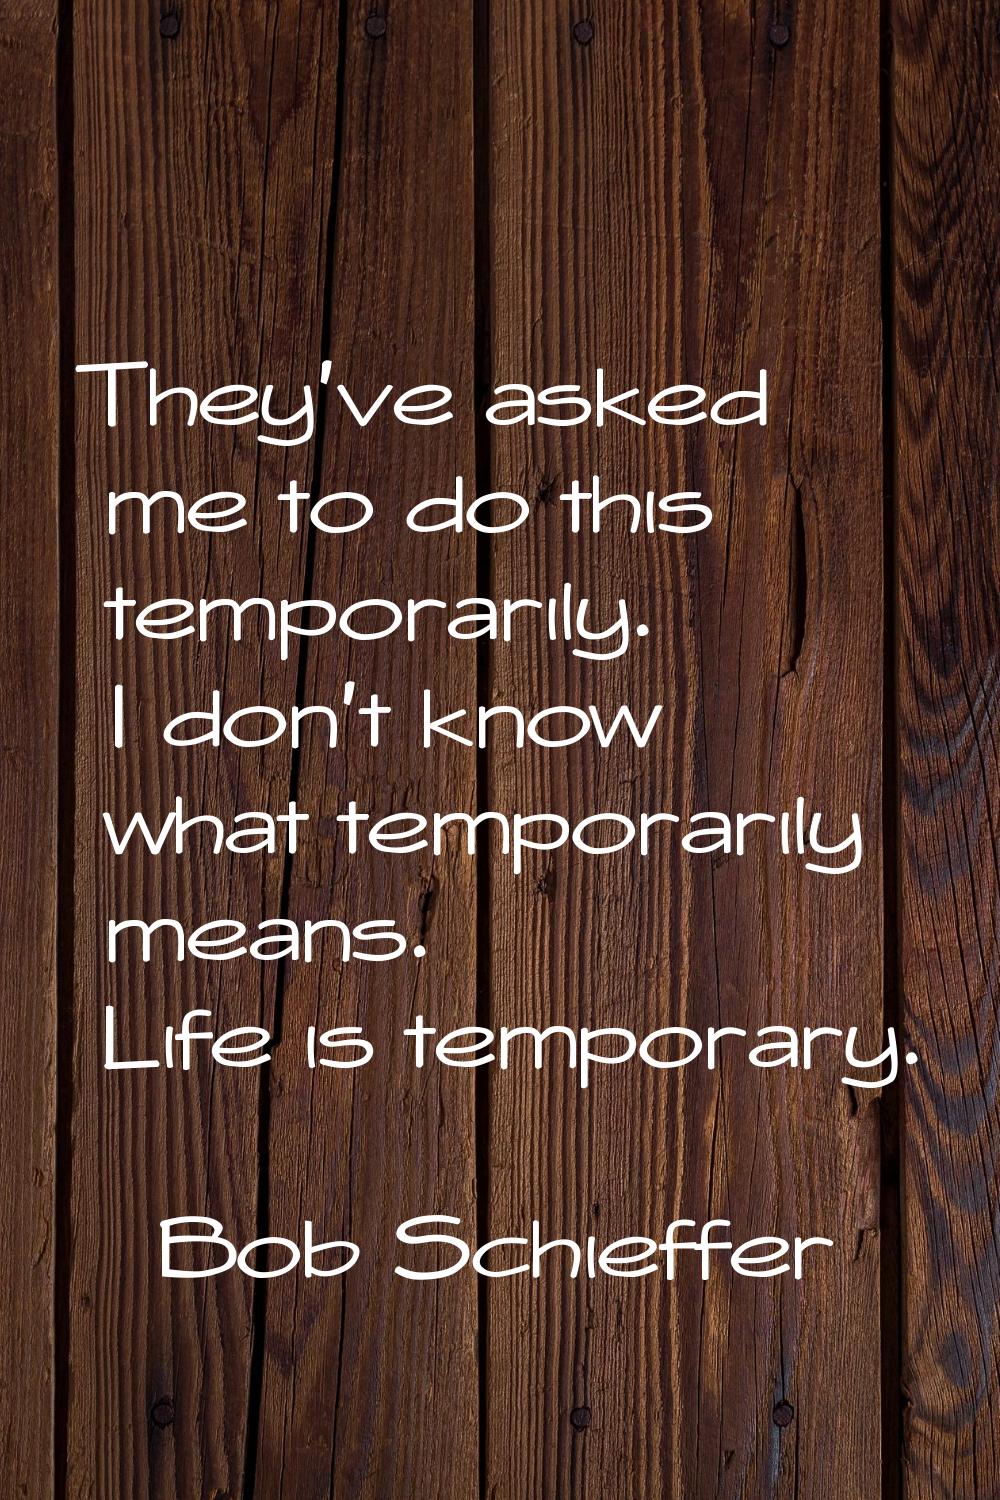 They've asked me to do this temporarily. I don't know what temporarily means. Life is temporary.